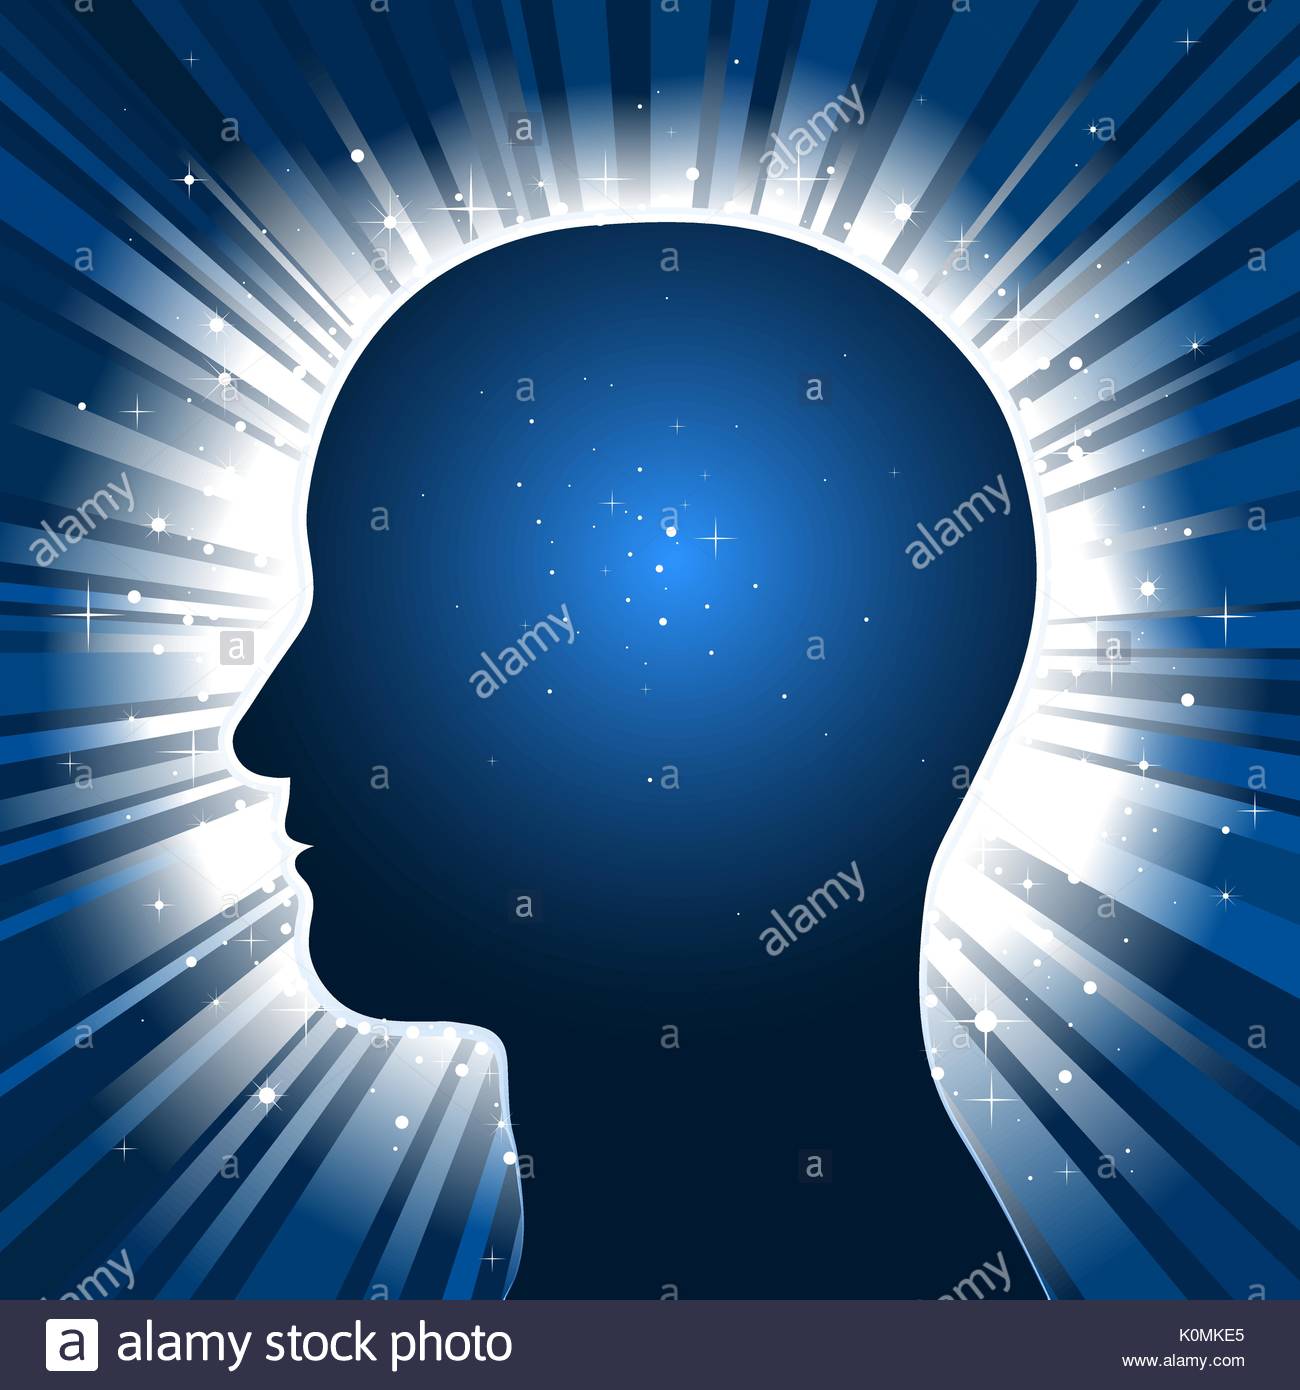 Head Silhouette With Star Burst Background Depicting Spiritual